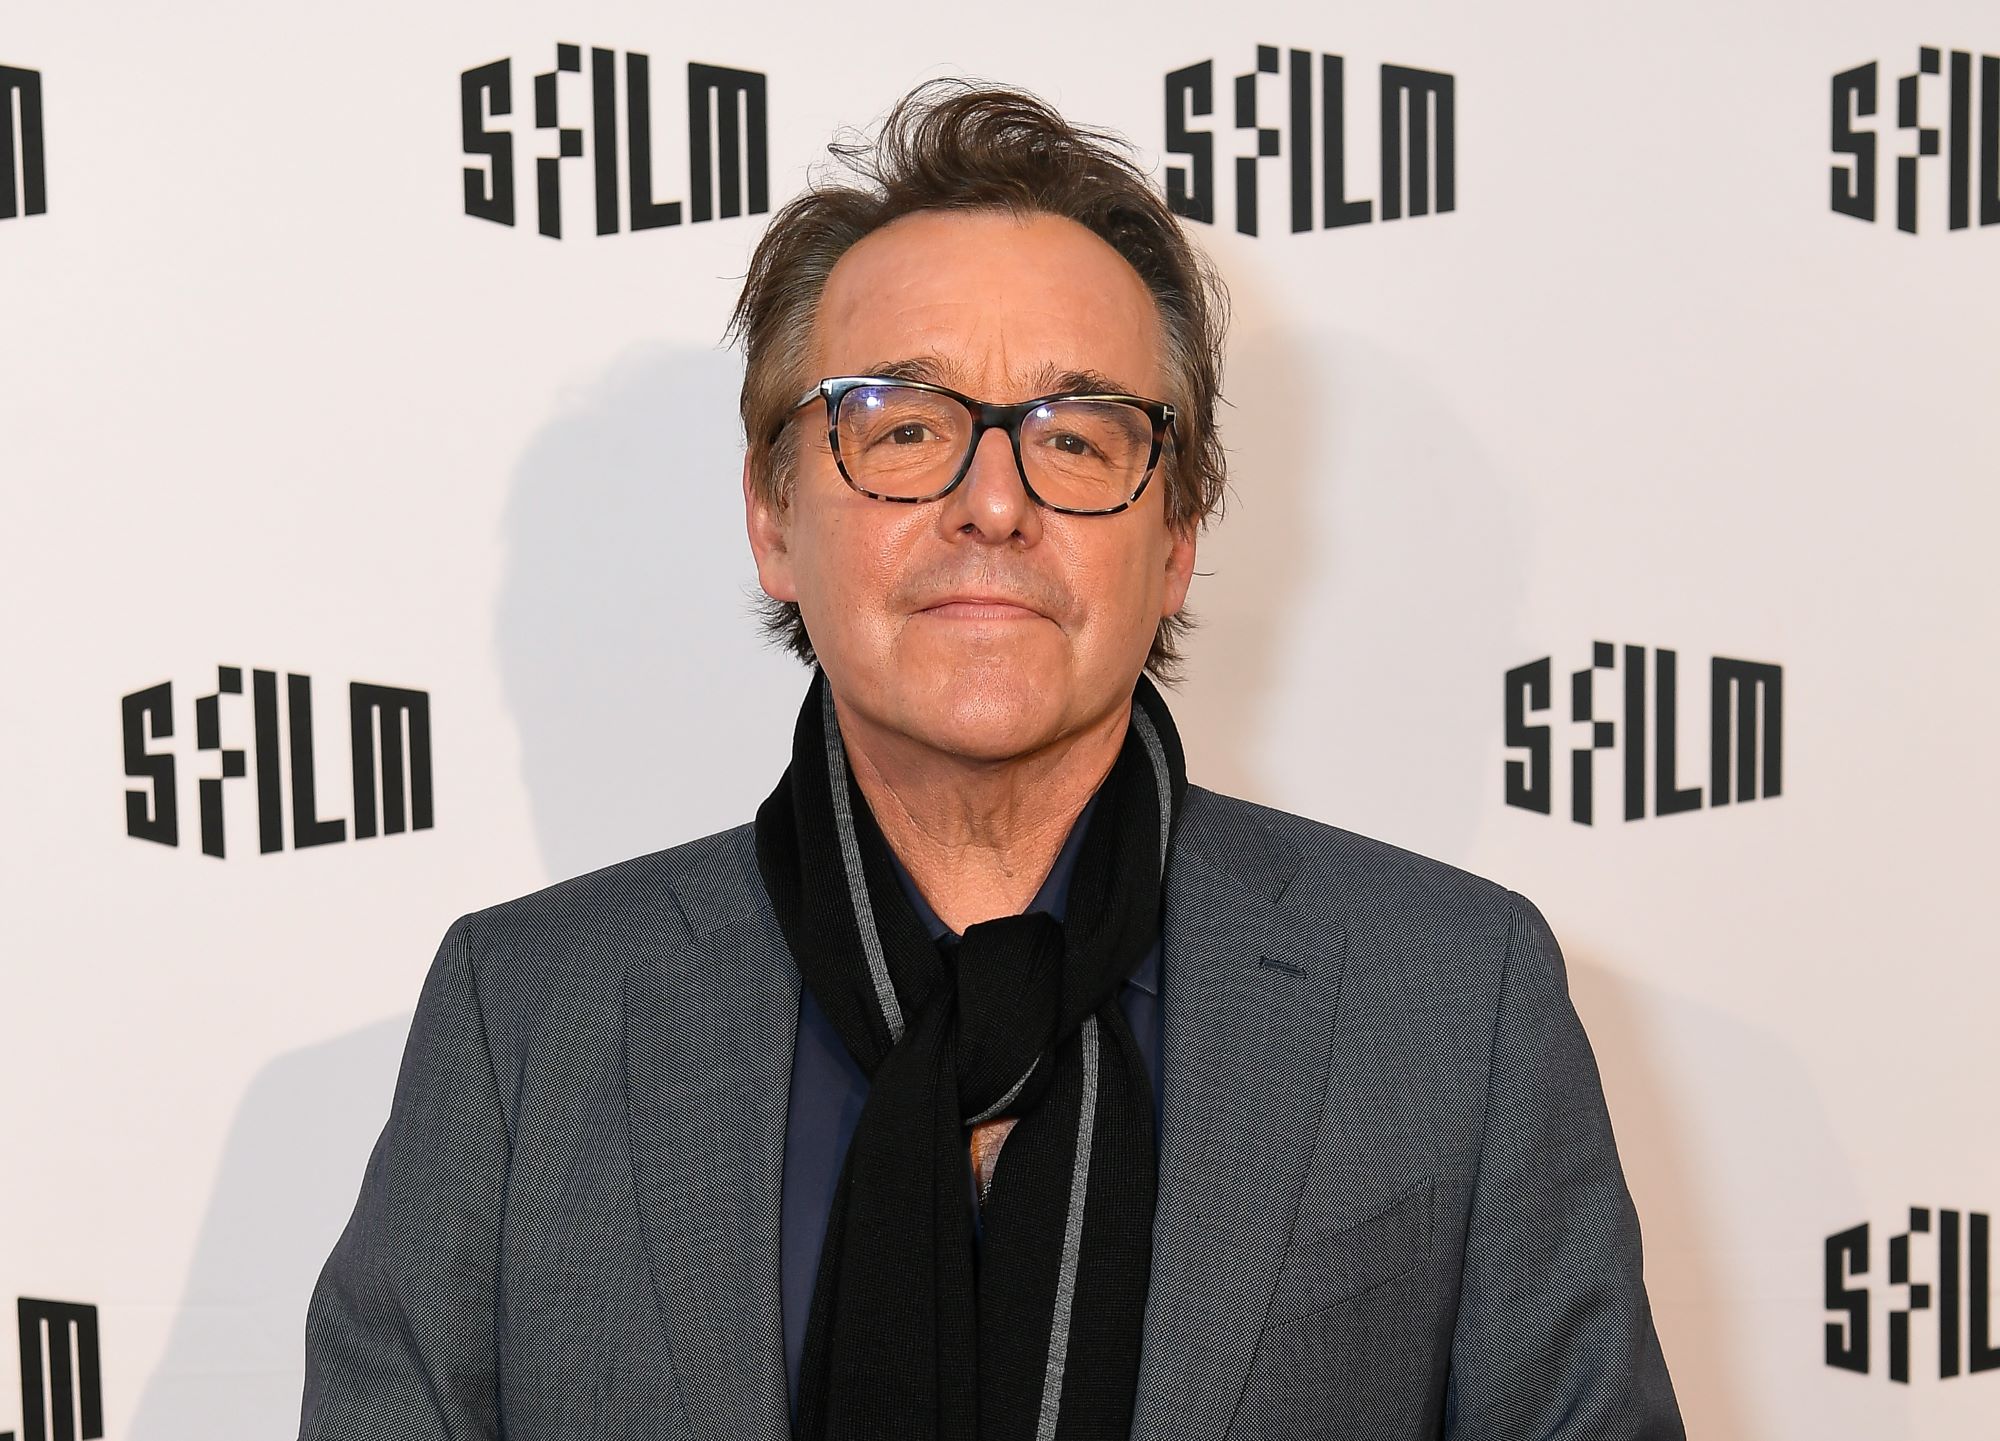 'Home Alone' director Chris Columbus, who was the original director of 'National Lampoon's Christmas Vacation,' wears a gray suit jacket over a blue shirt and a black scarf.